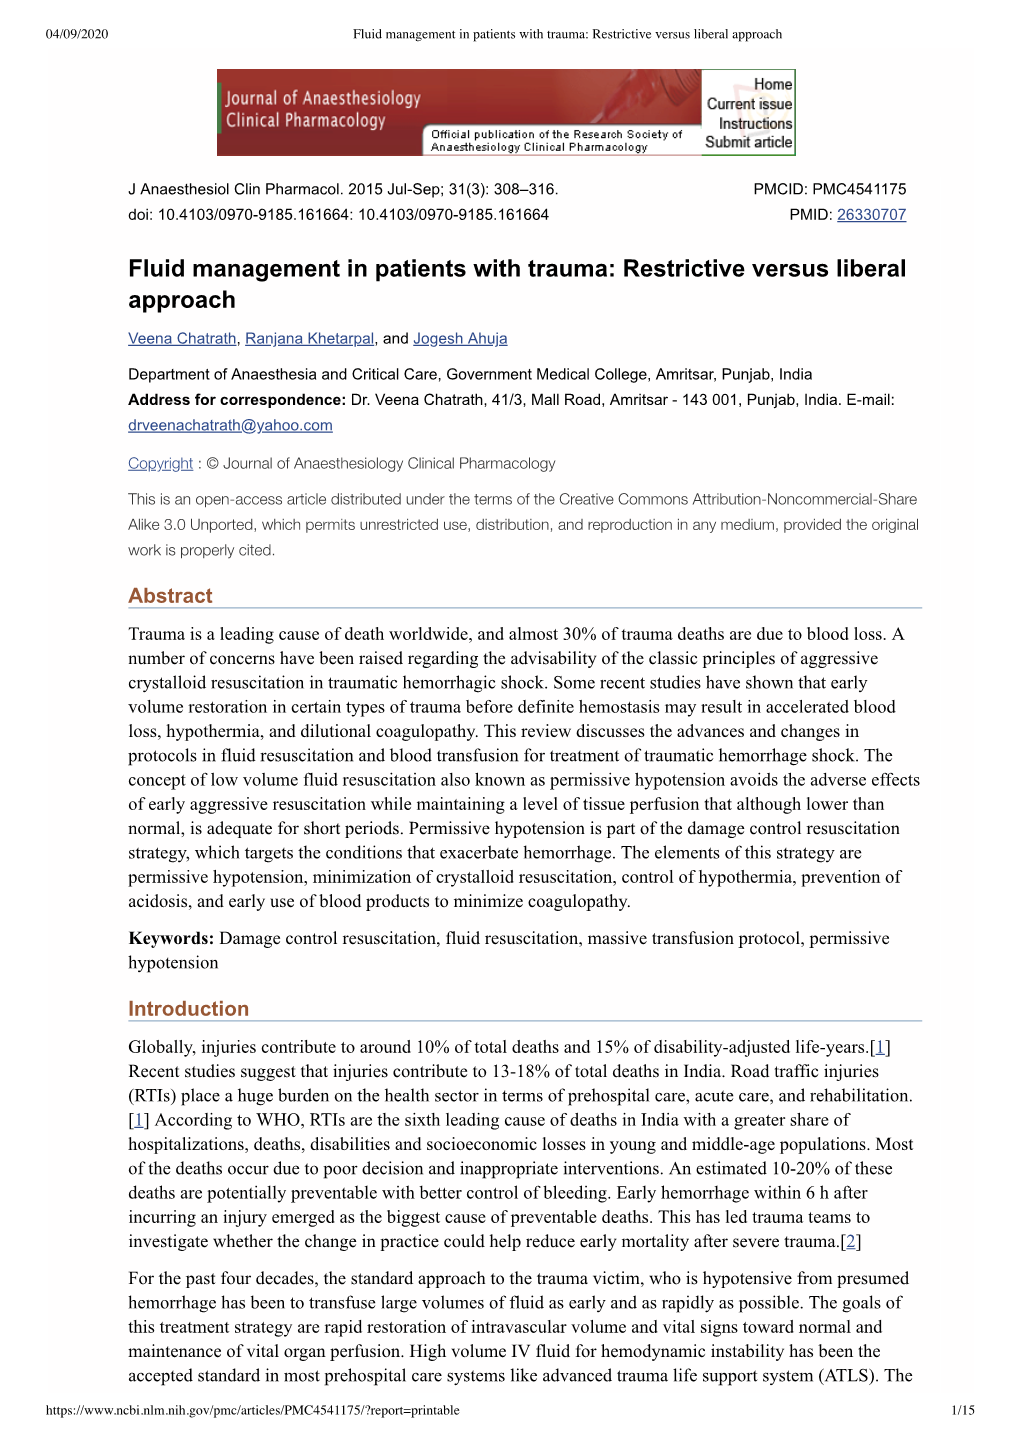 Fluid Management in Patients with Trauma: Restrictive Versus Liberal Approach